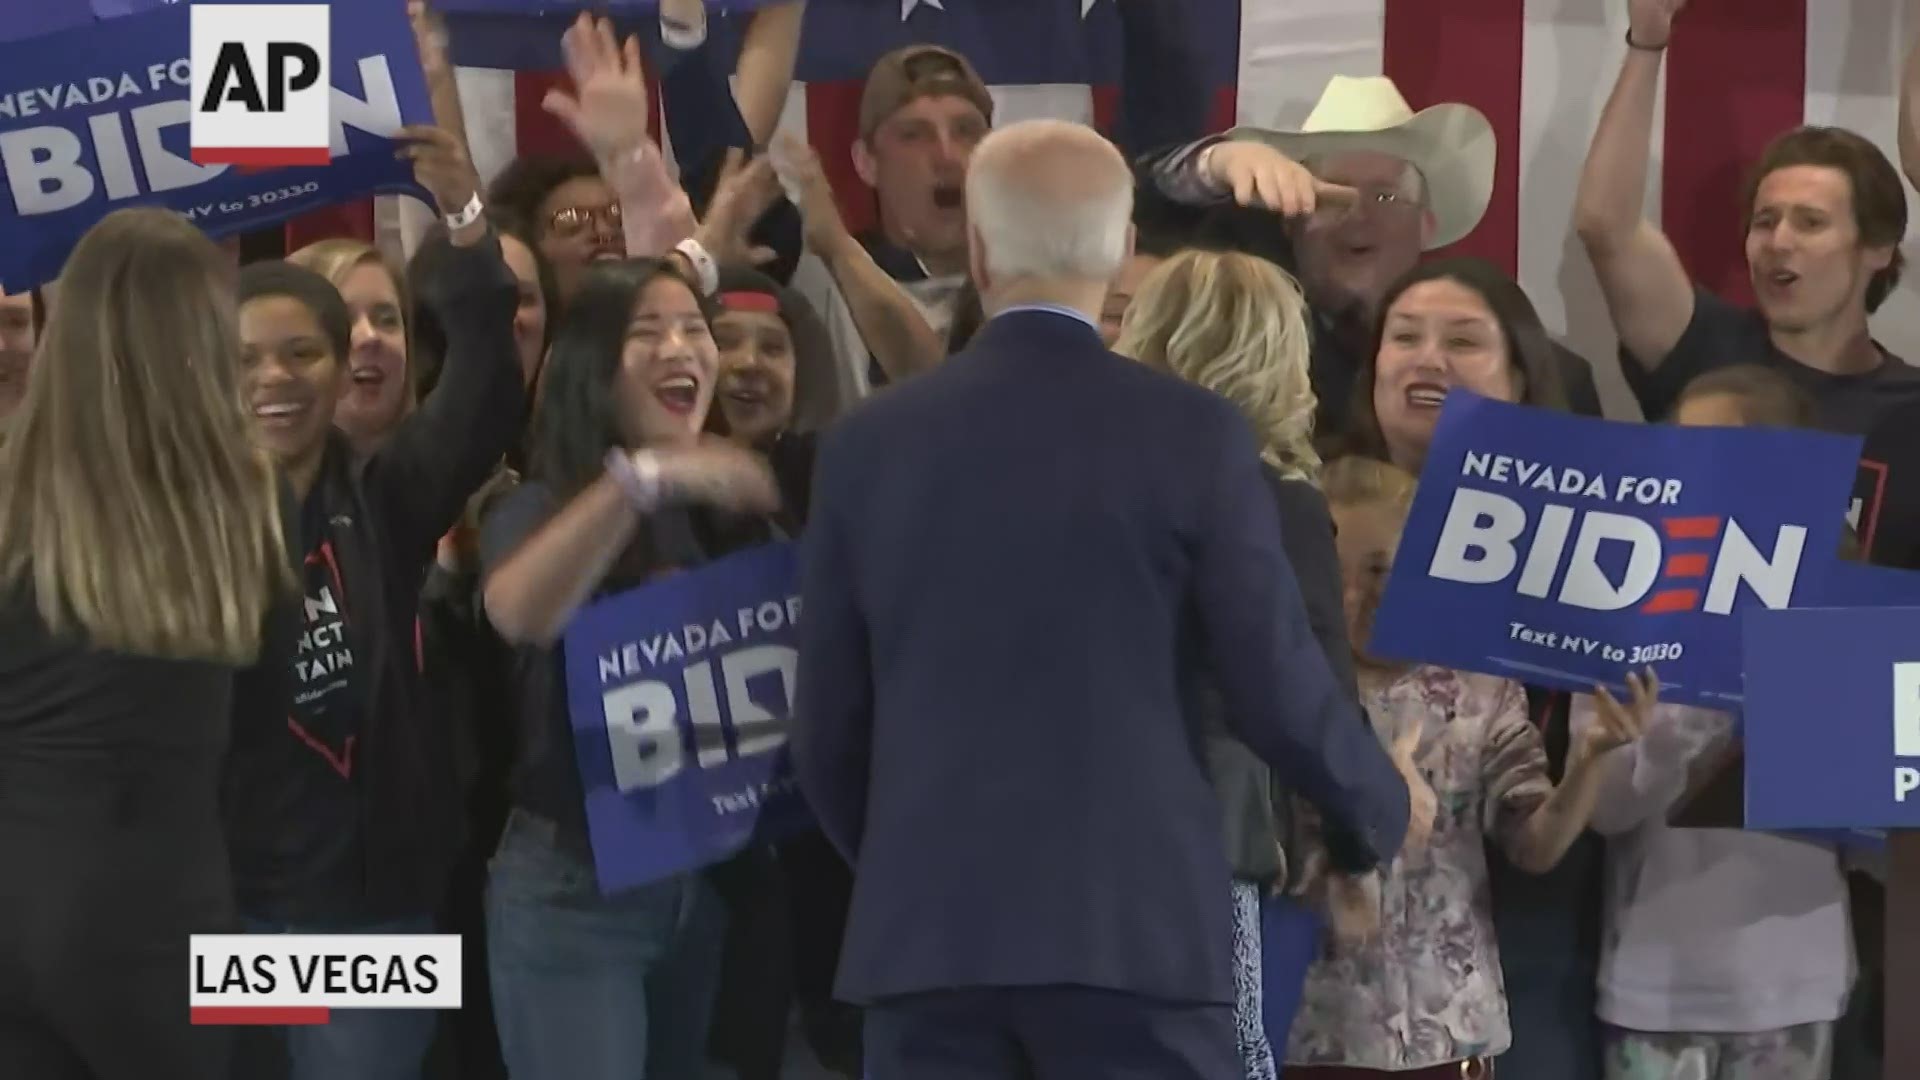 Biden is declaring himself back into the race for the presidency after early results in Nevada showed the former vice president in second place.